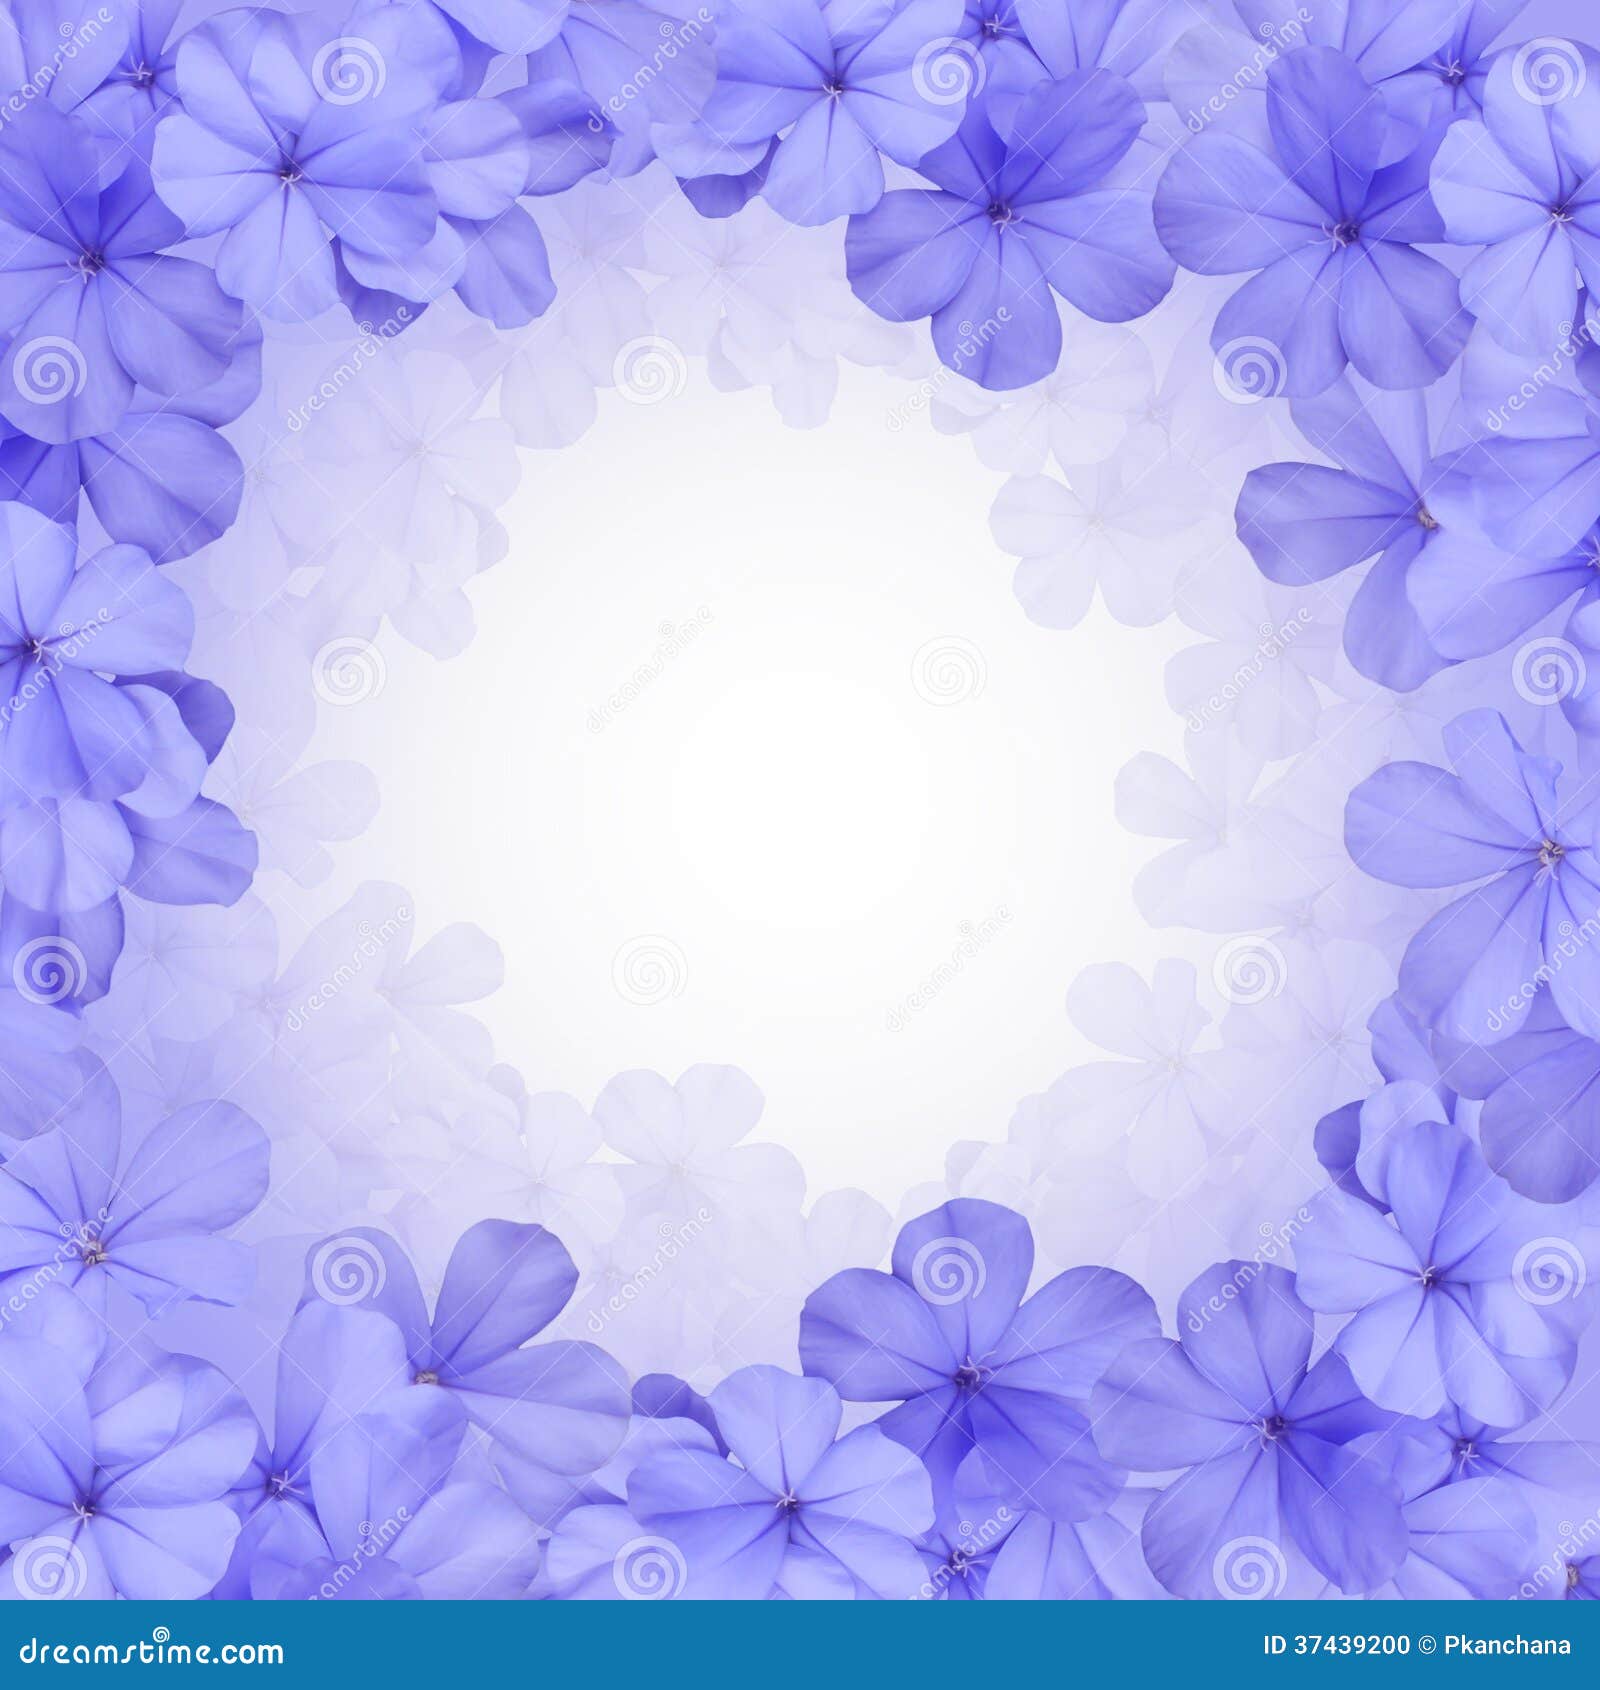 Border Or Background With Blue Flower Stock Photo - Image ...